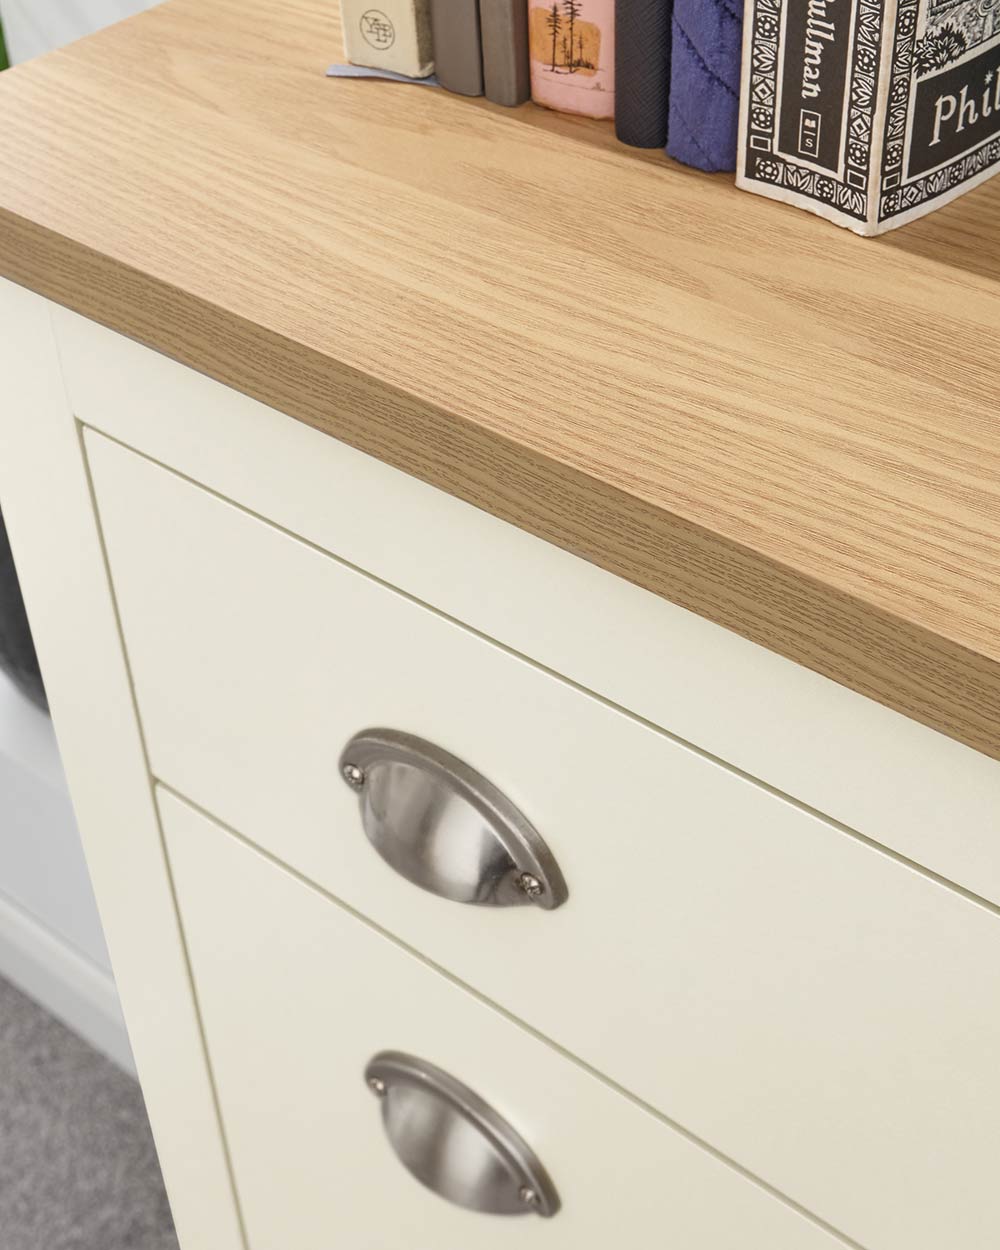 lancaster shoe storage cabinet in cream in  a lifestyle setting close up of the oak veneer top and the handles